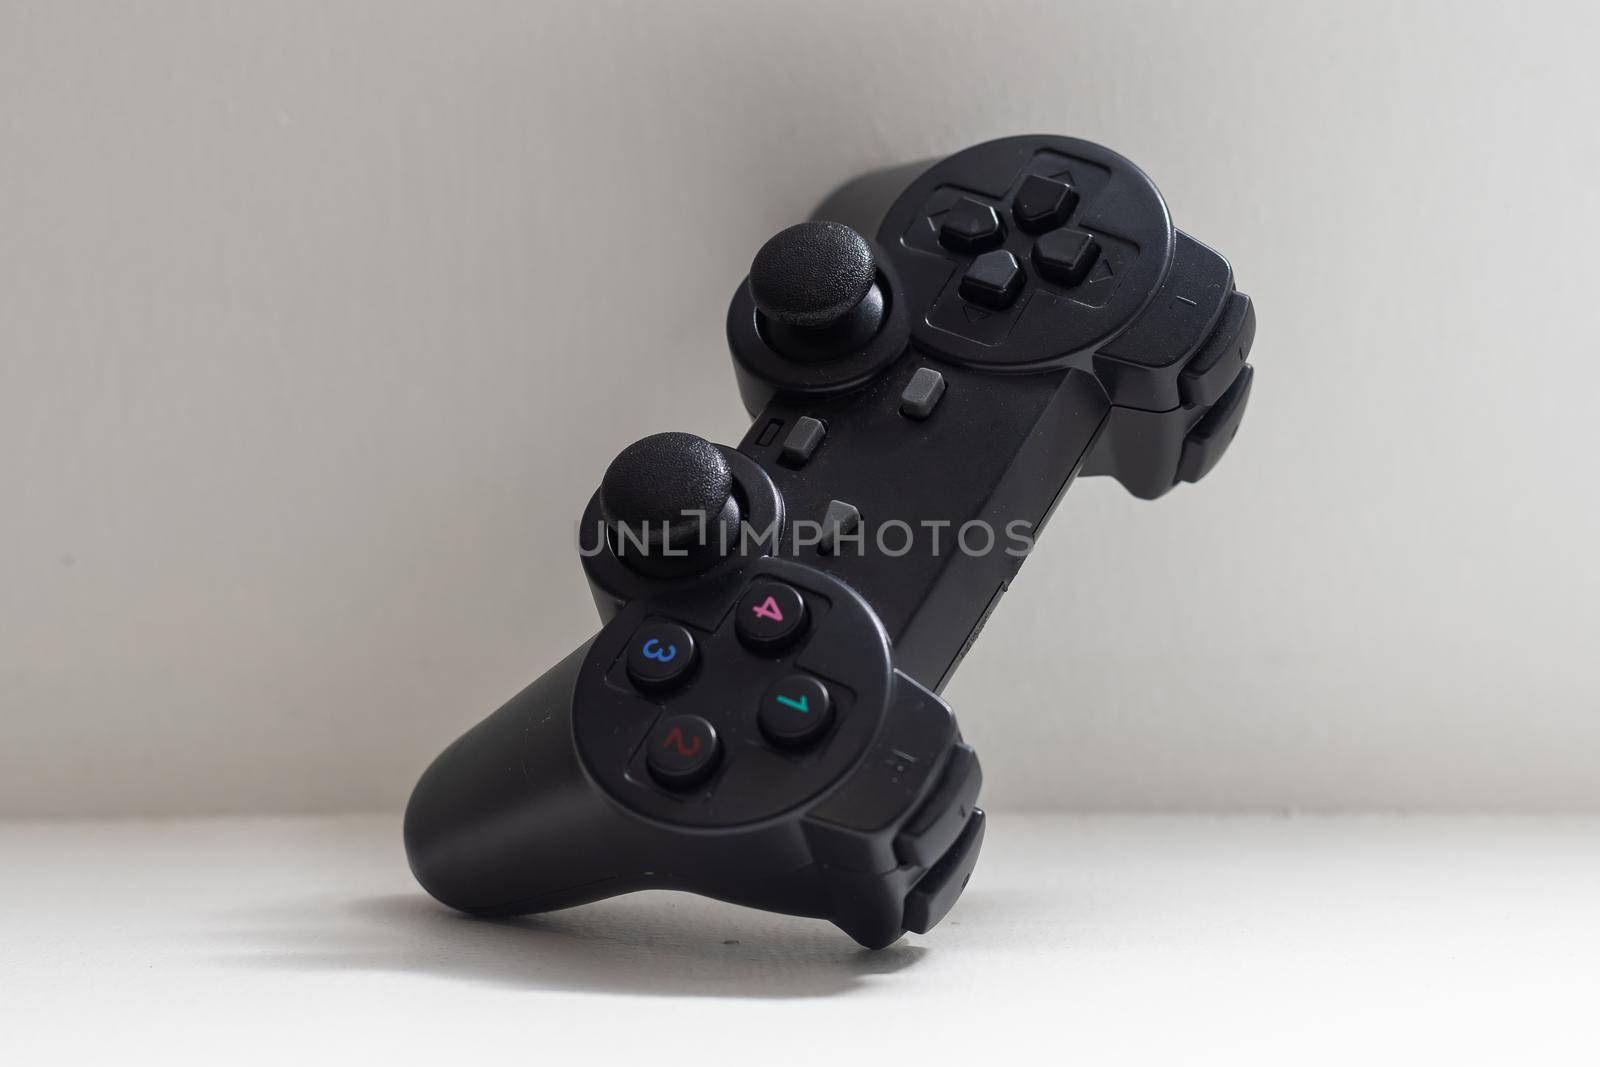 joystick for the game on white background by Andelov13